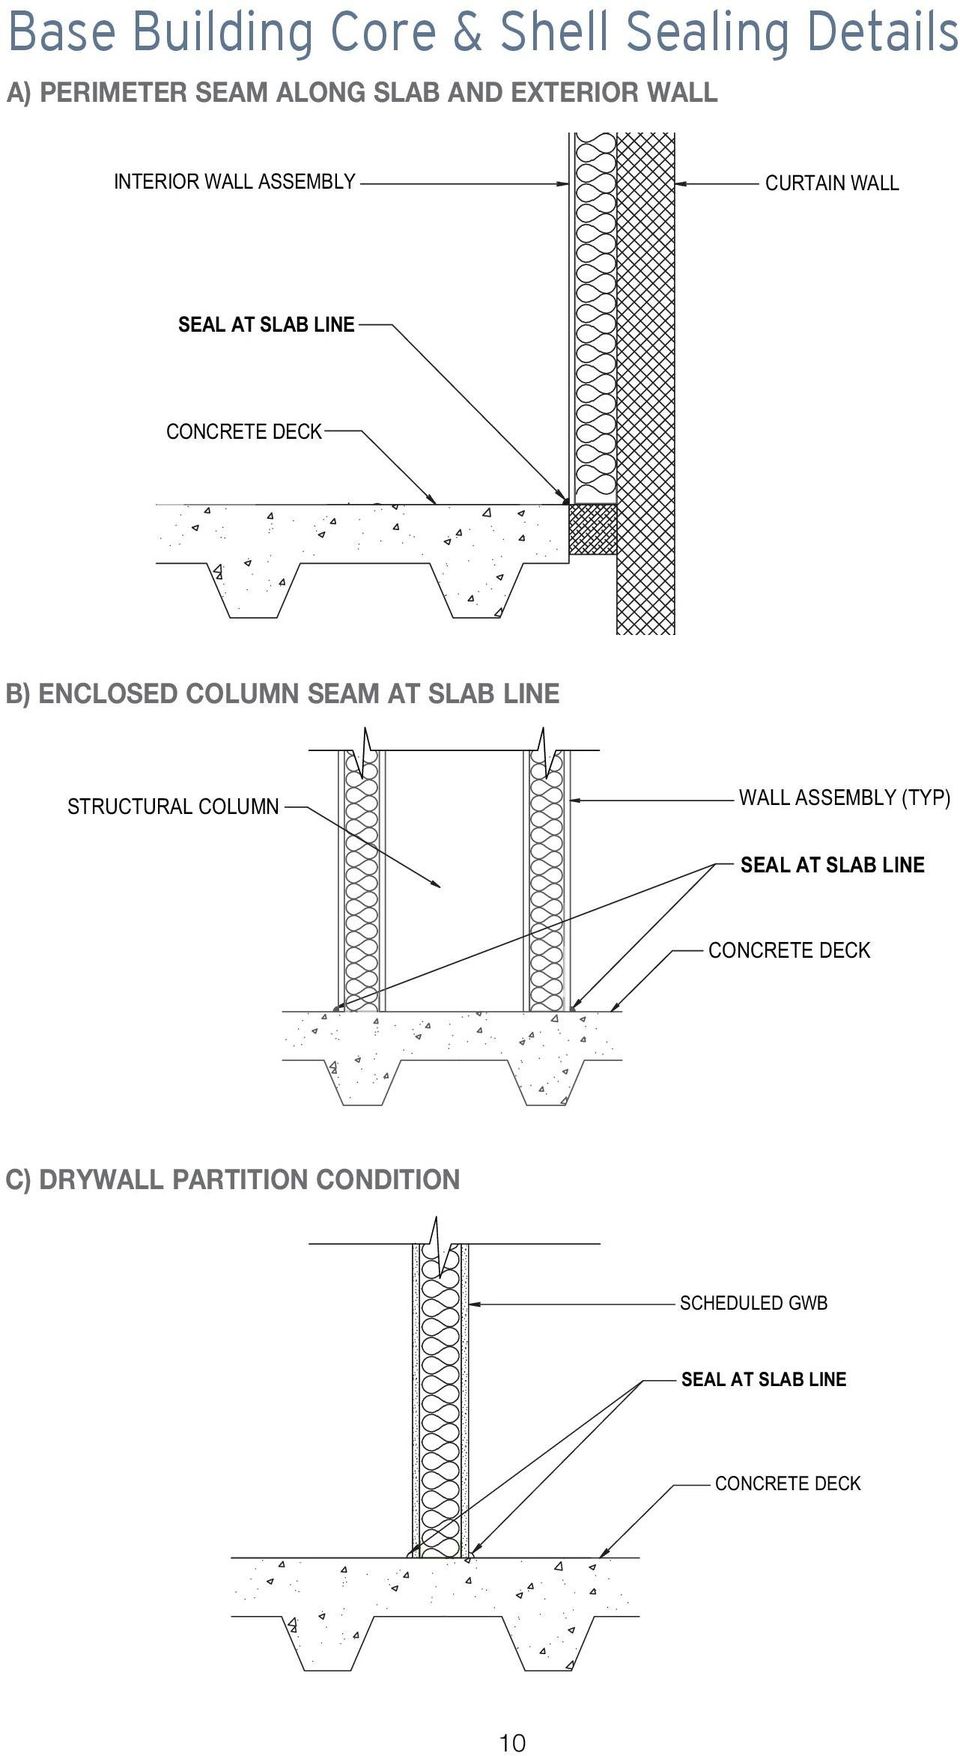 ENCLOSED COLUMN SEAM AT SLAB LINE STRUCTURAL COLUMN WALL ASSEMBLY (TYP)